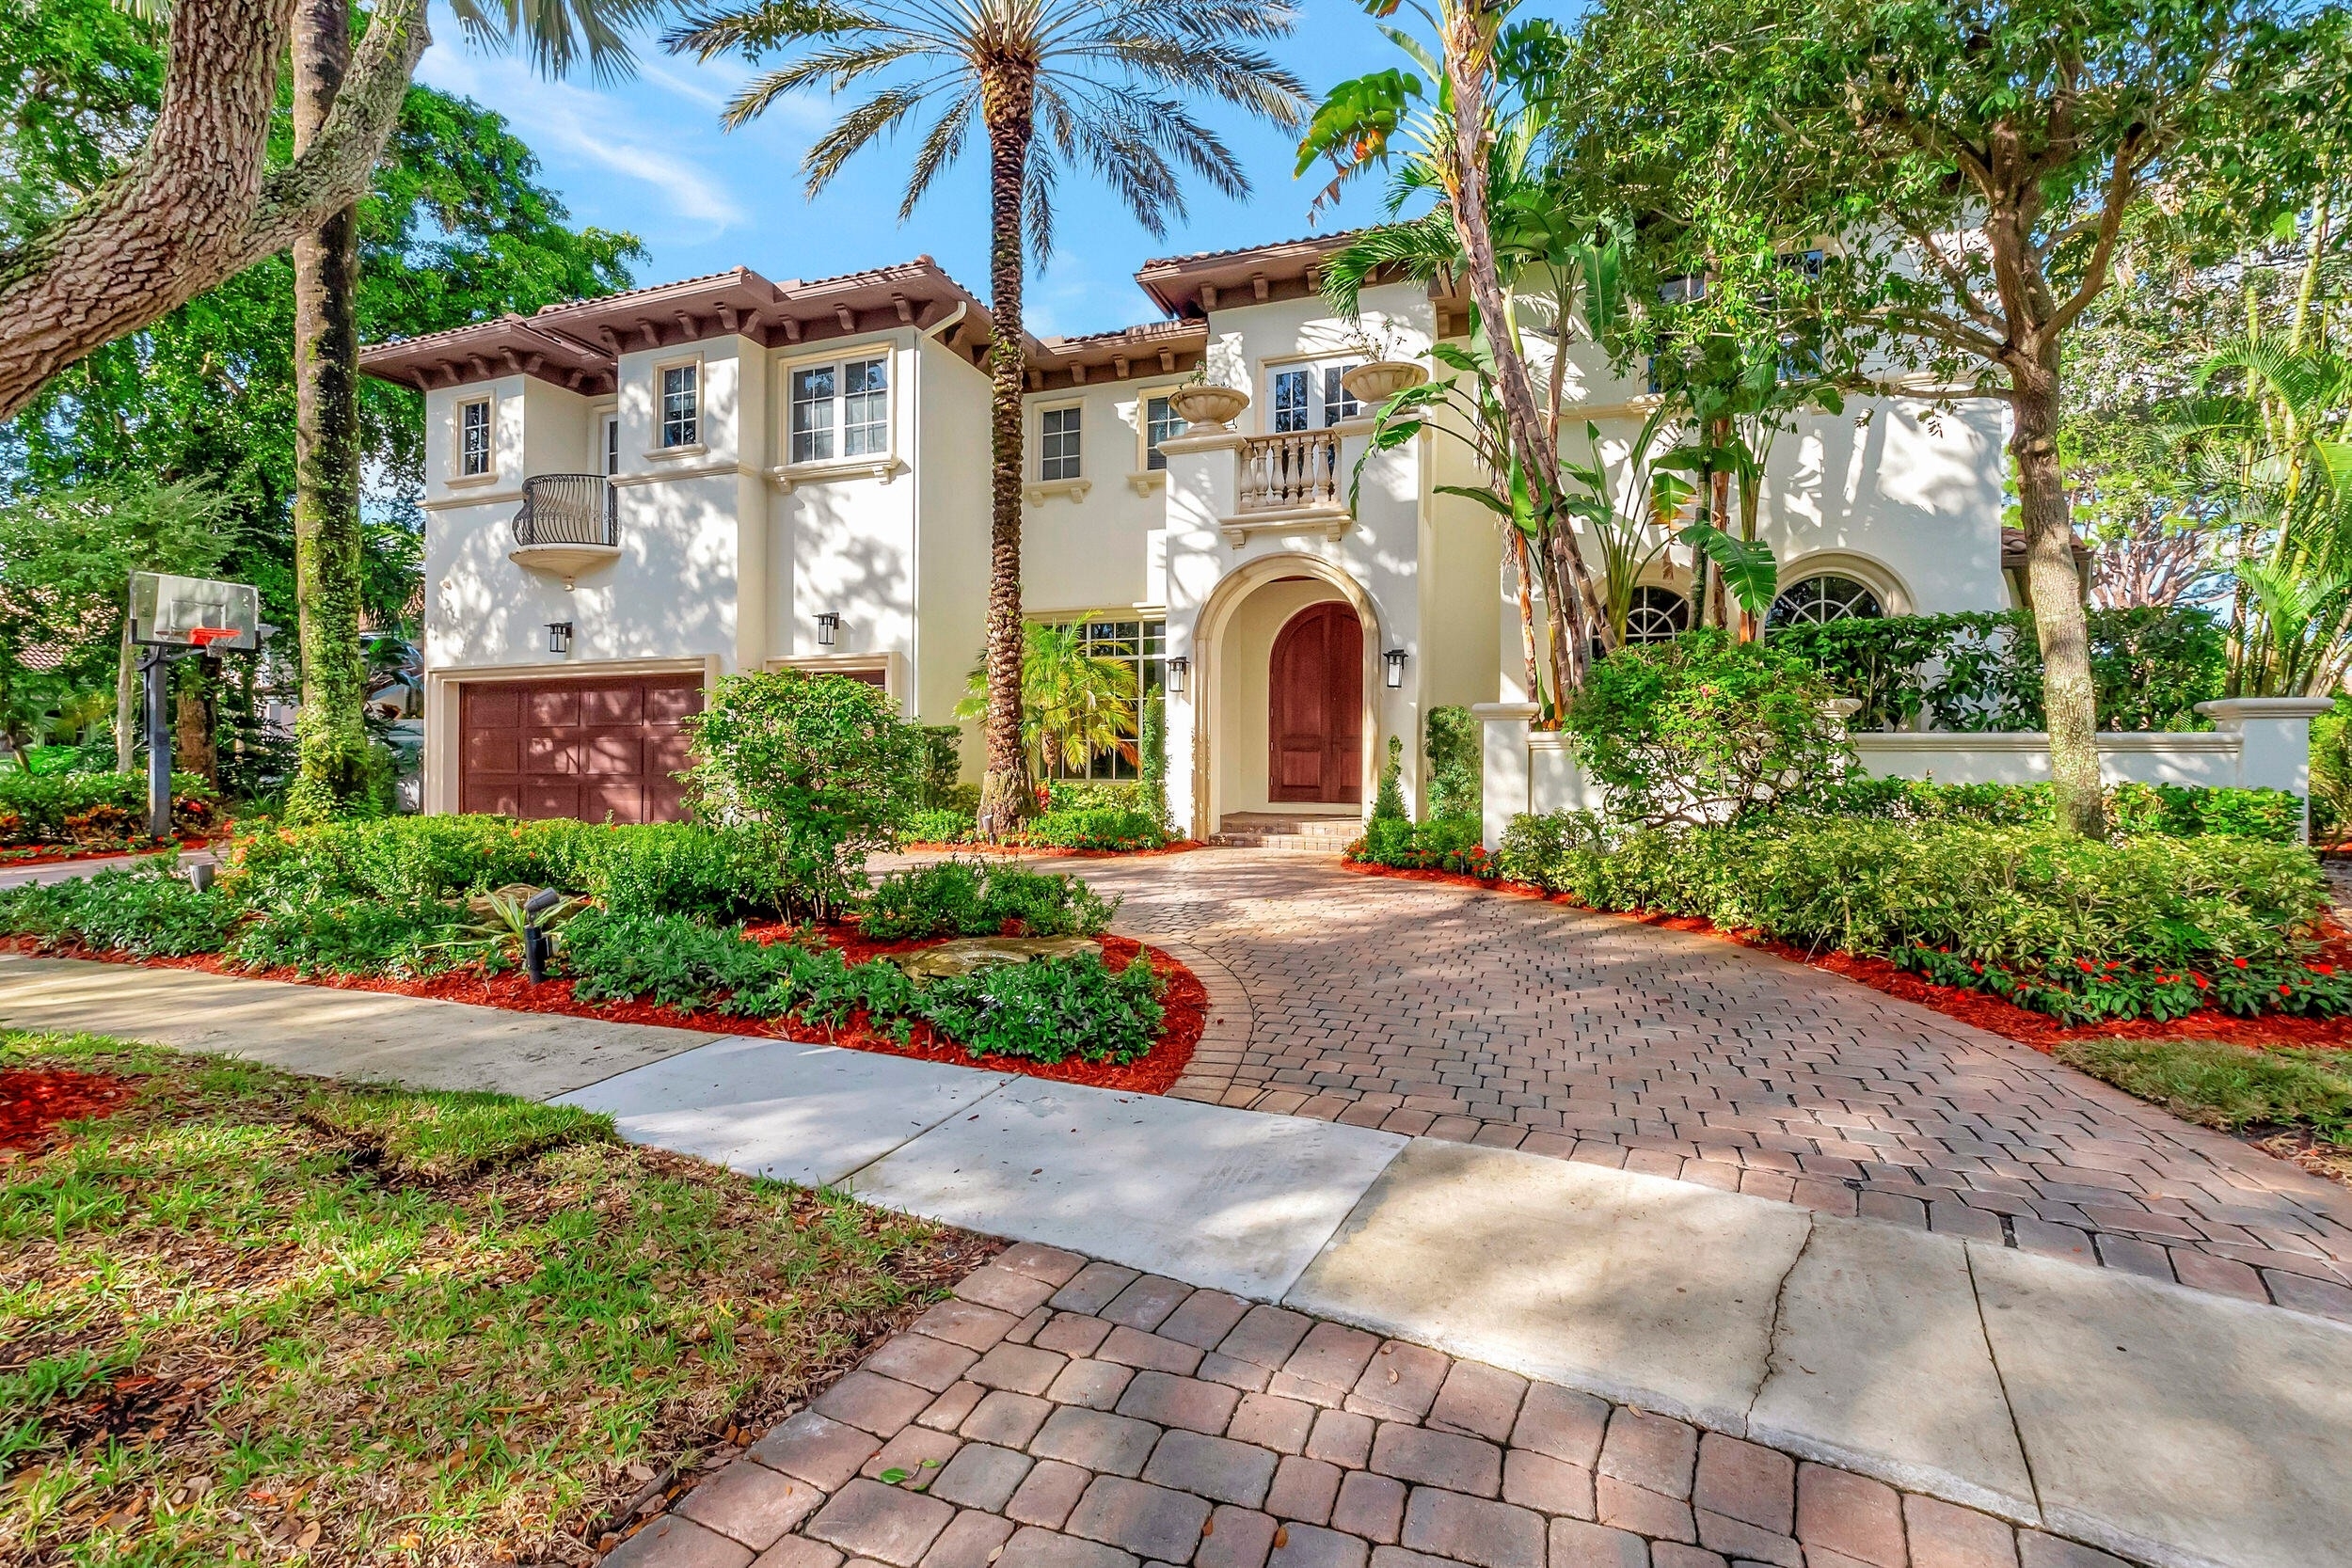 Single Family Home for Sale at Woodfield Country Club, Boca Raton, FL 33496